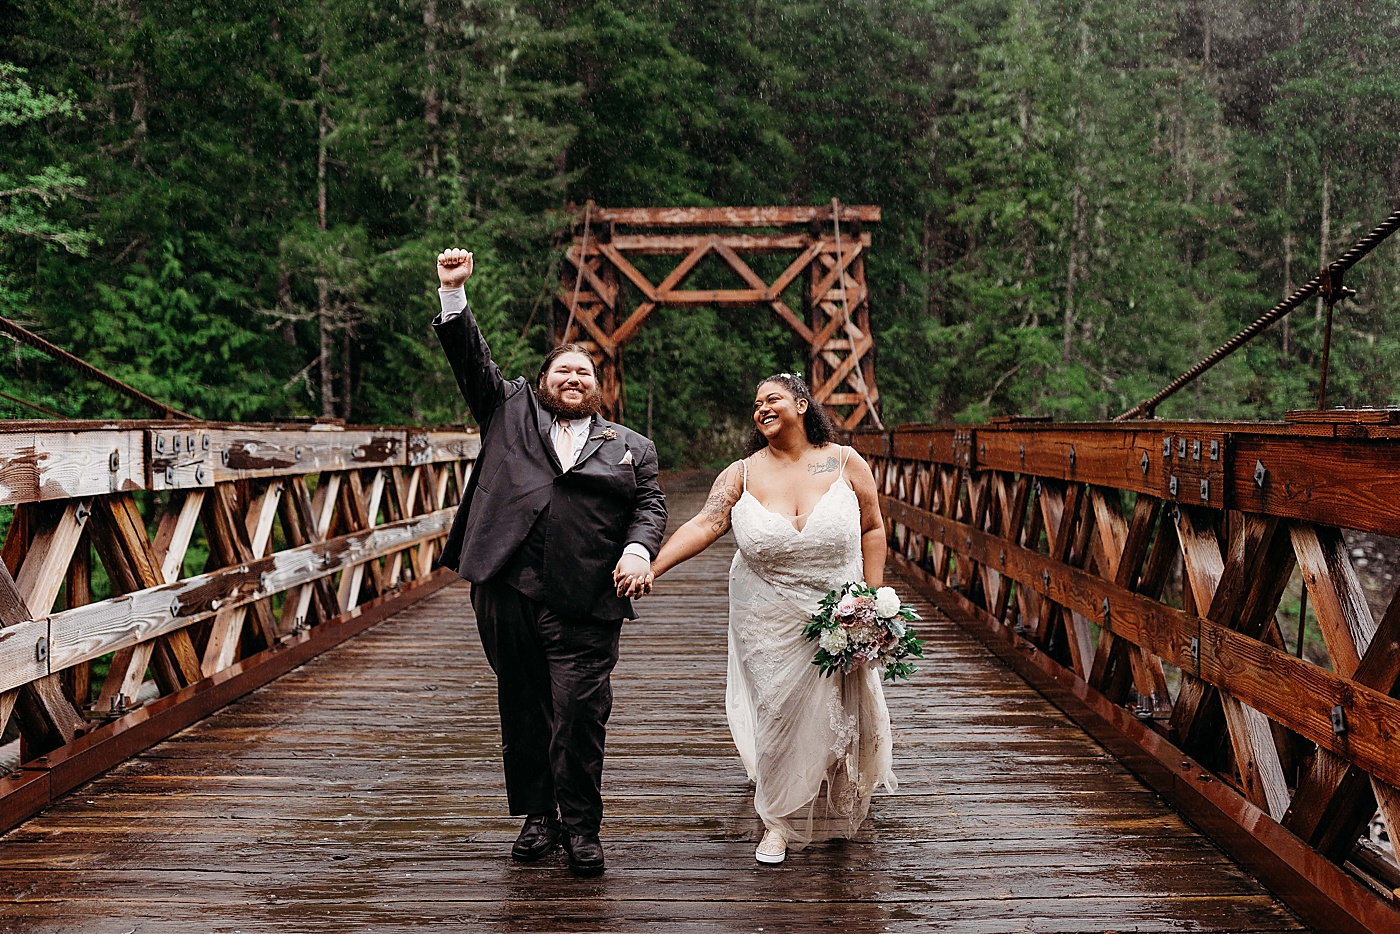 Bride and groom portraits in the rain at Mount Rainier elopement at Longmire | Photo by Megan Montalvo Photography